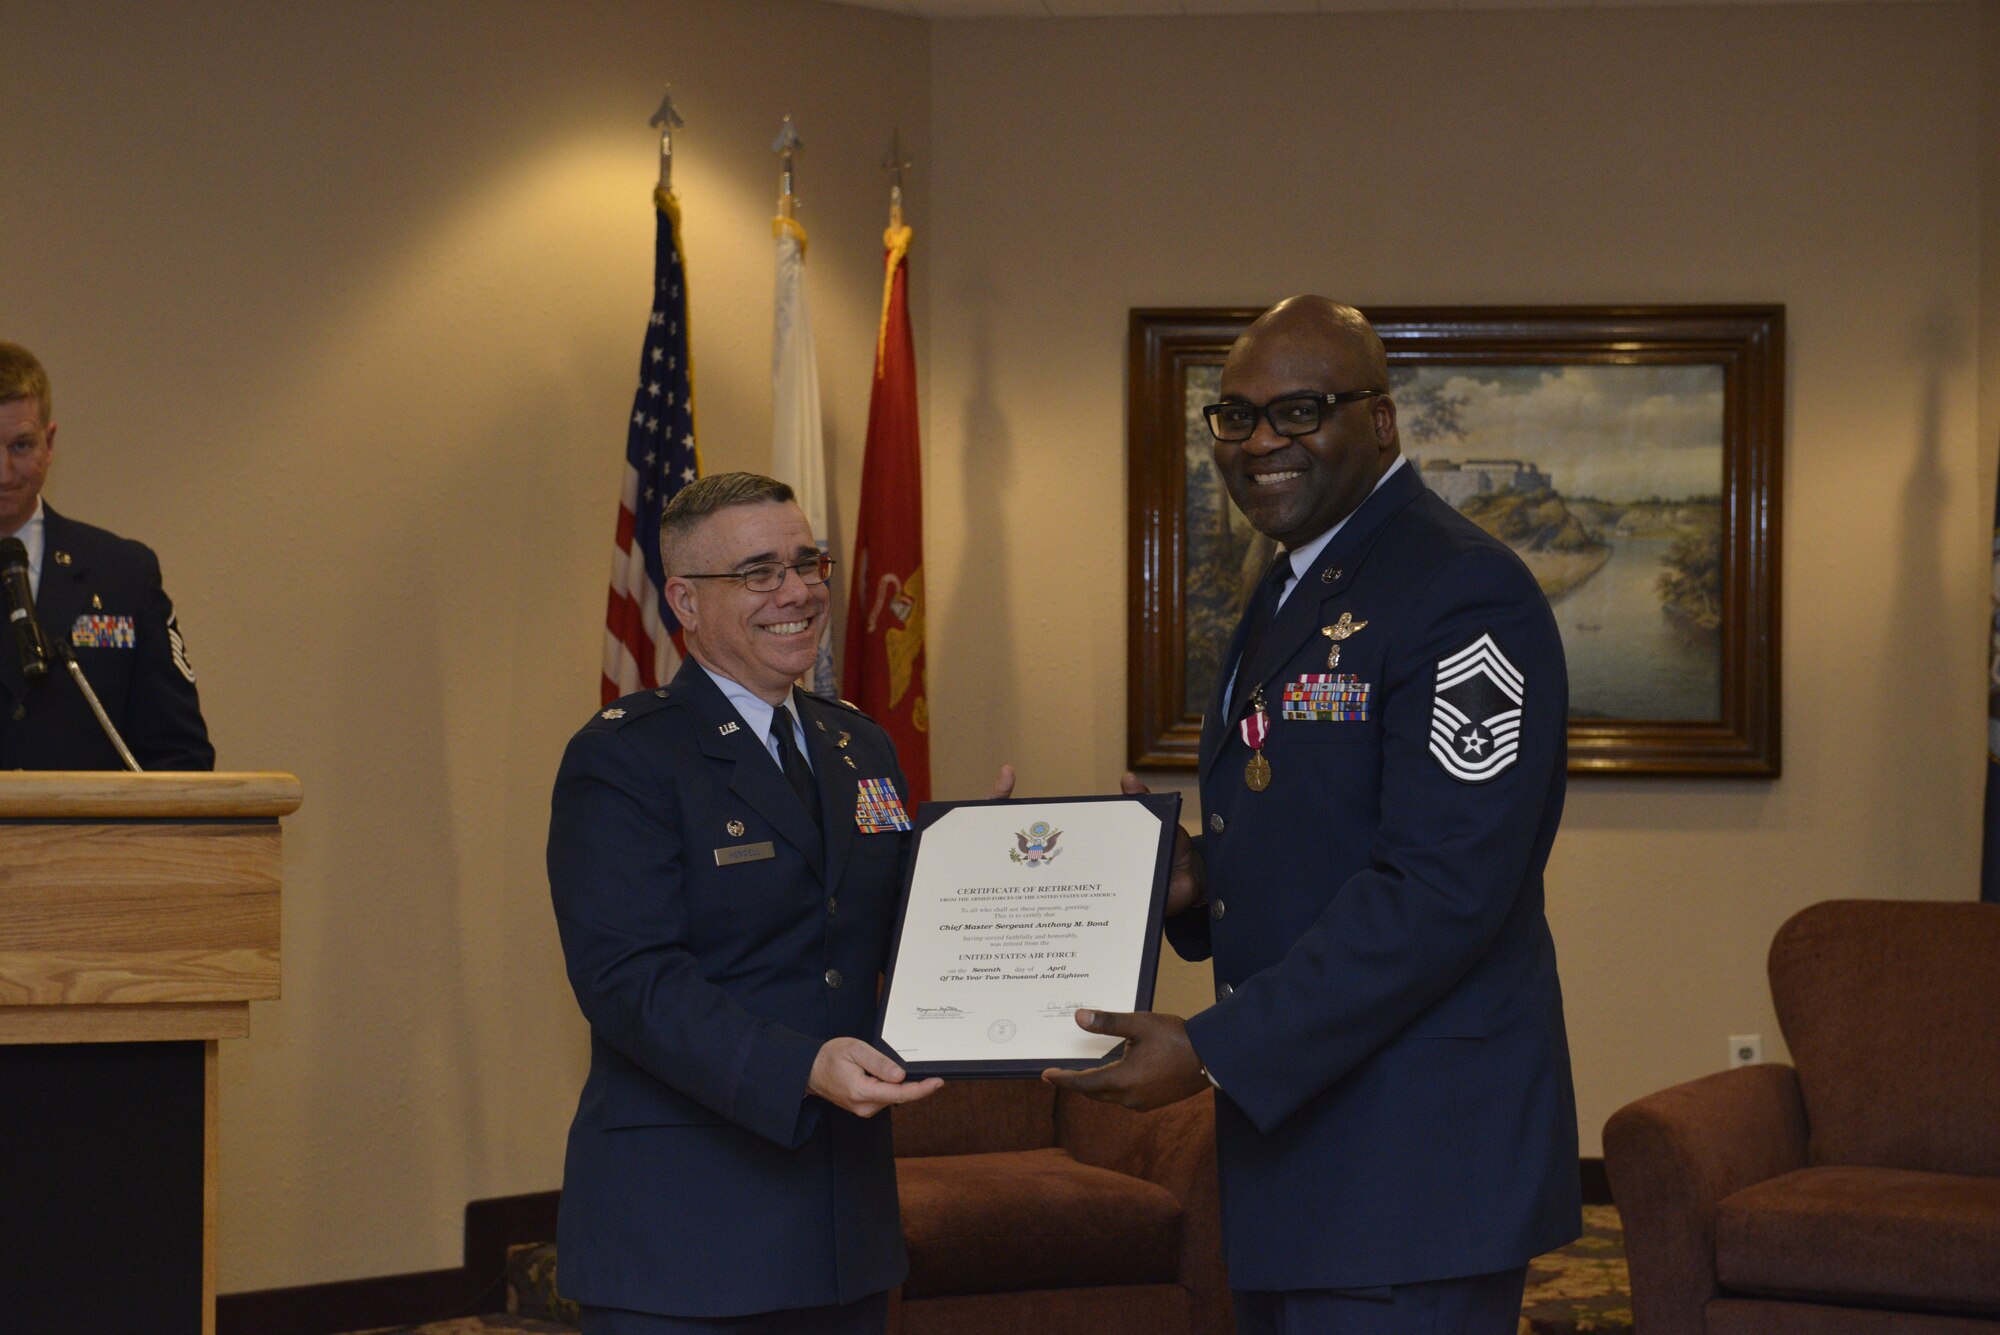 Chief Master Sgt. Anthony Bond accepts his retirement certificate April 7 from Lt. Col. Matthew Hendell, 934th Aeromedical Evacuation Squadron commander, at the Minneapolis St. Paul Air Reserve Station, Minn. (Air Force Photo/Staff Sgt. Amber Jacobs.)